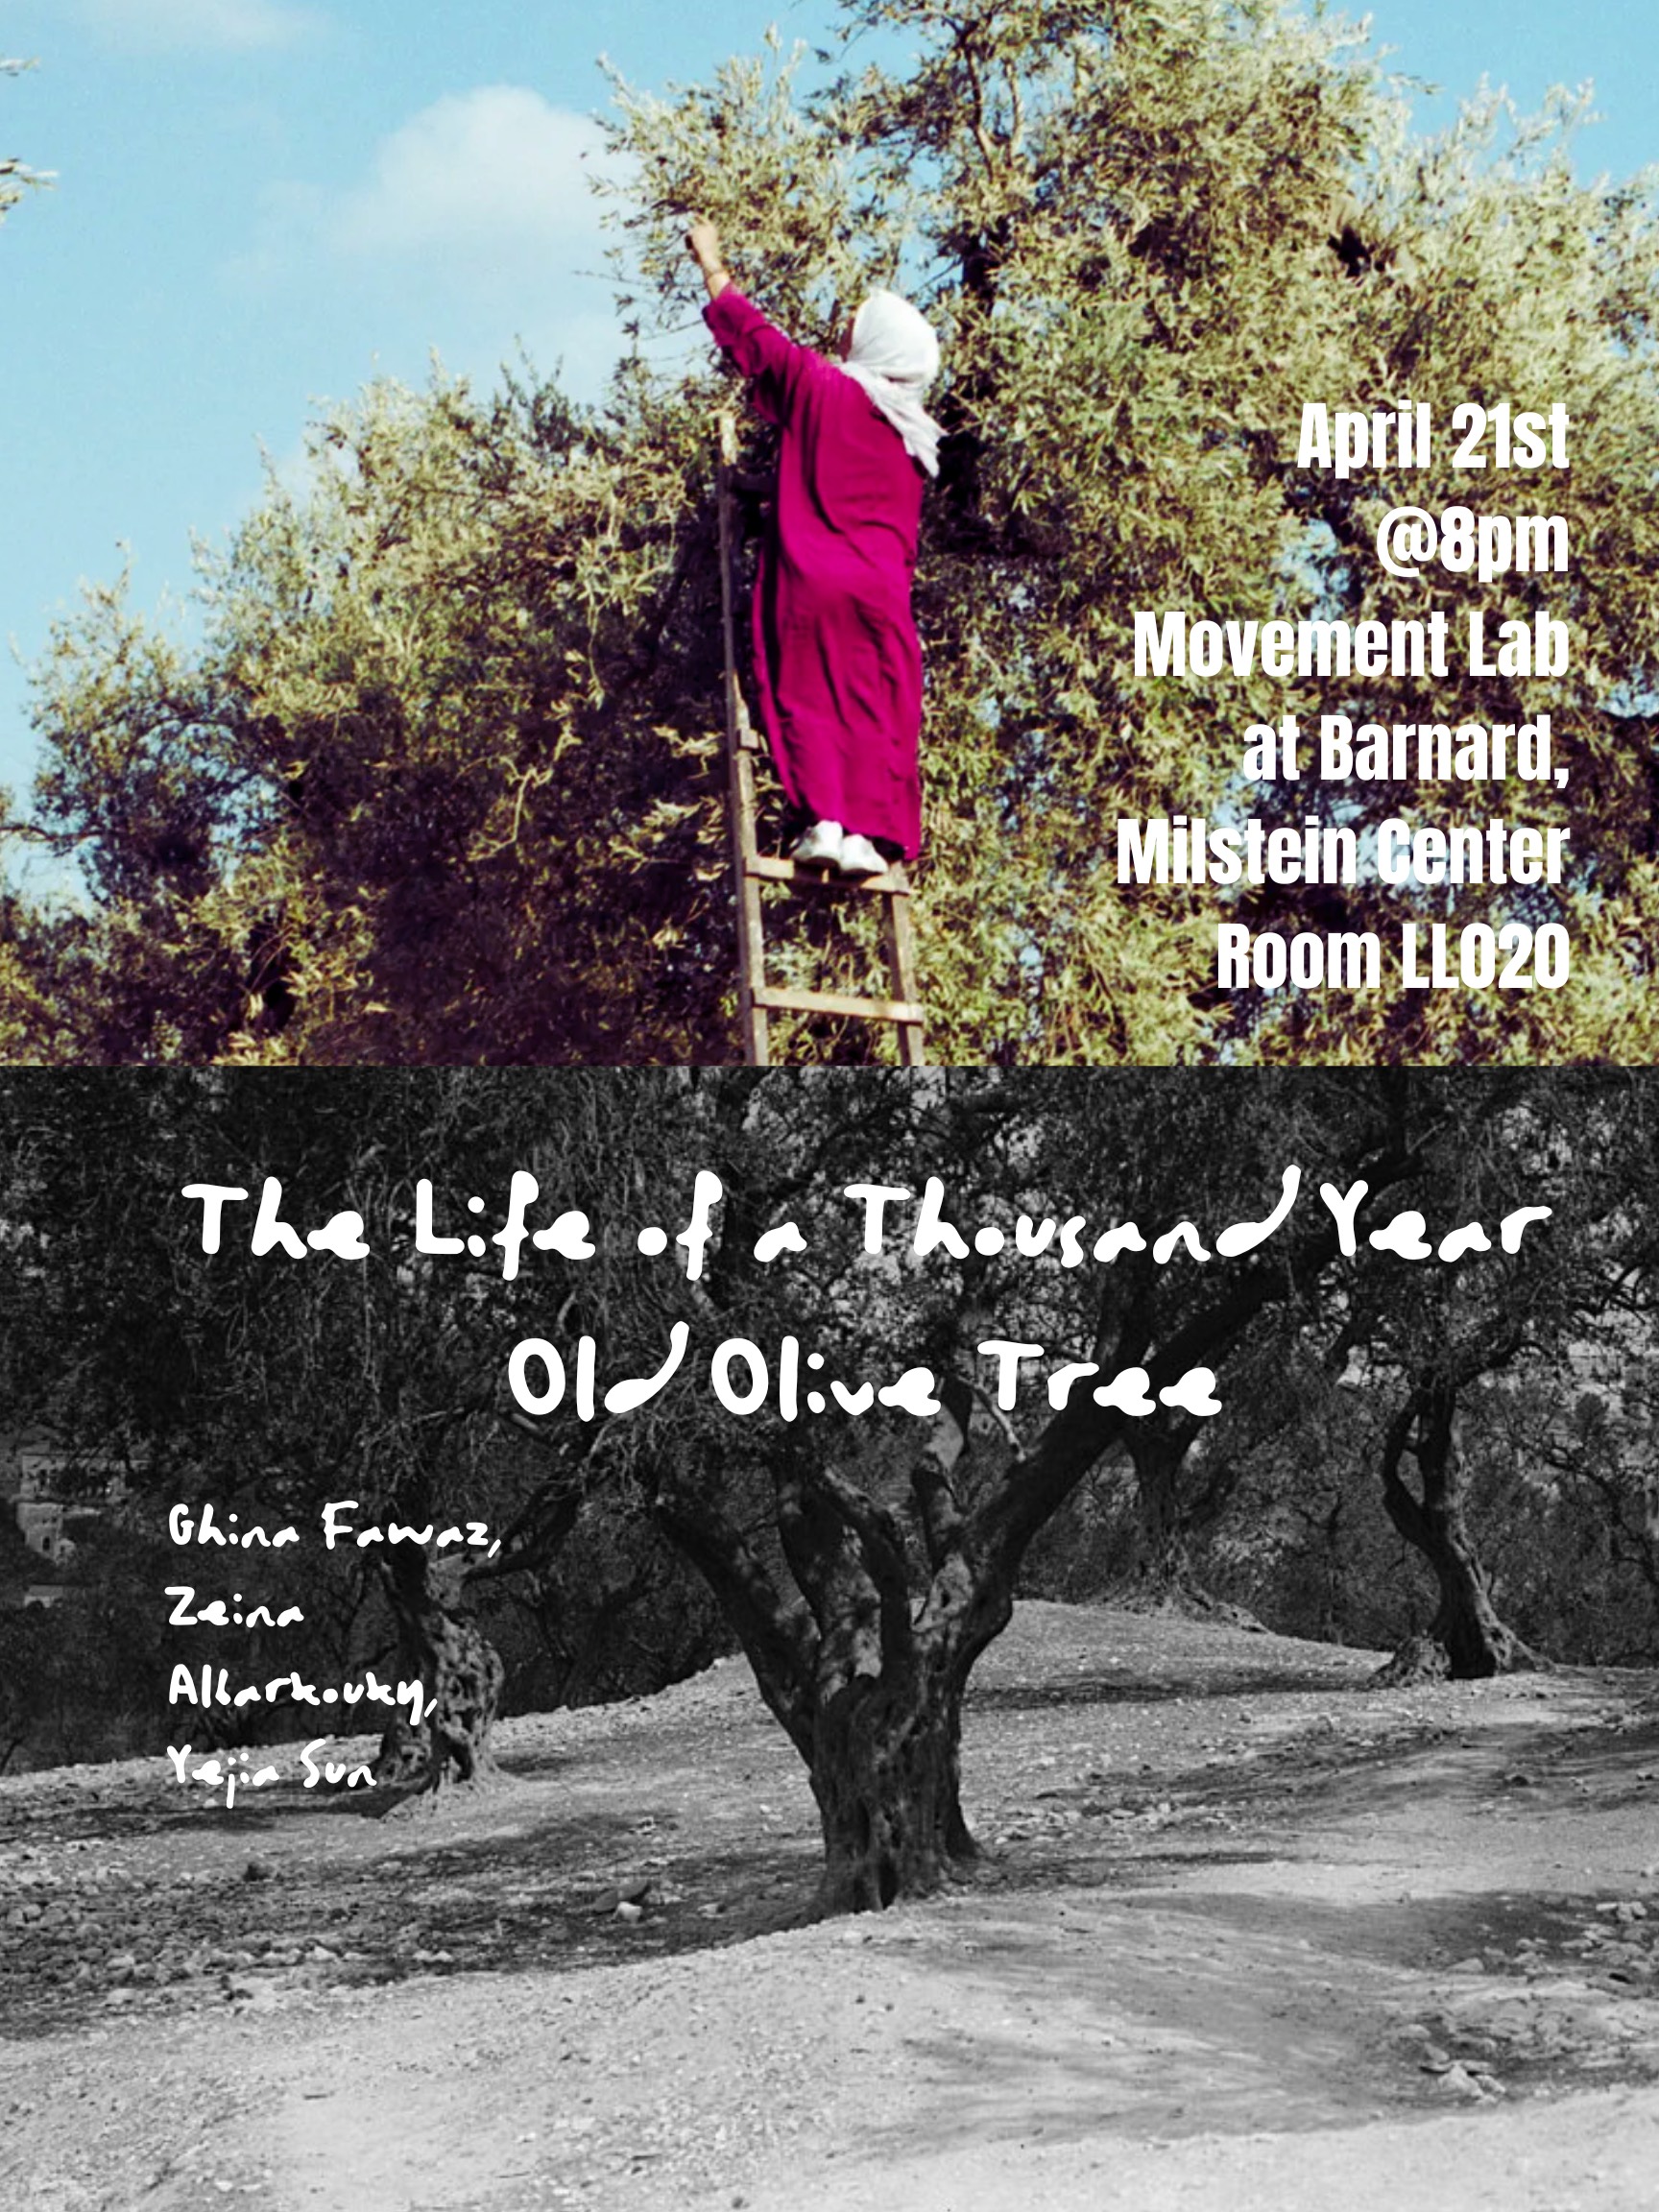 The Life of One Thousand-Year Olive Tree 